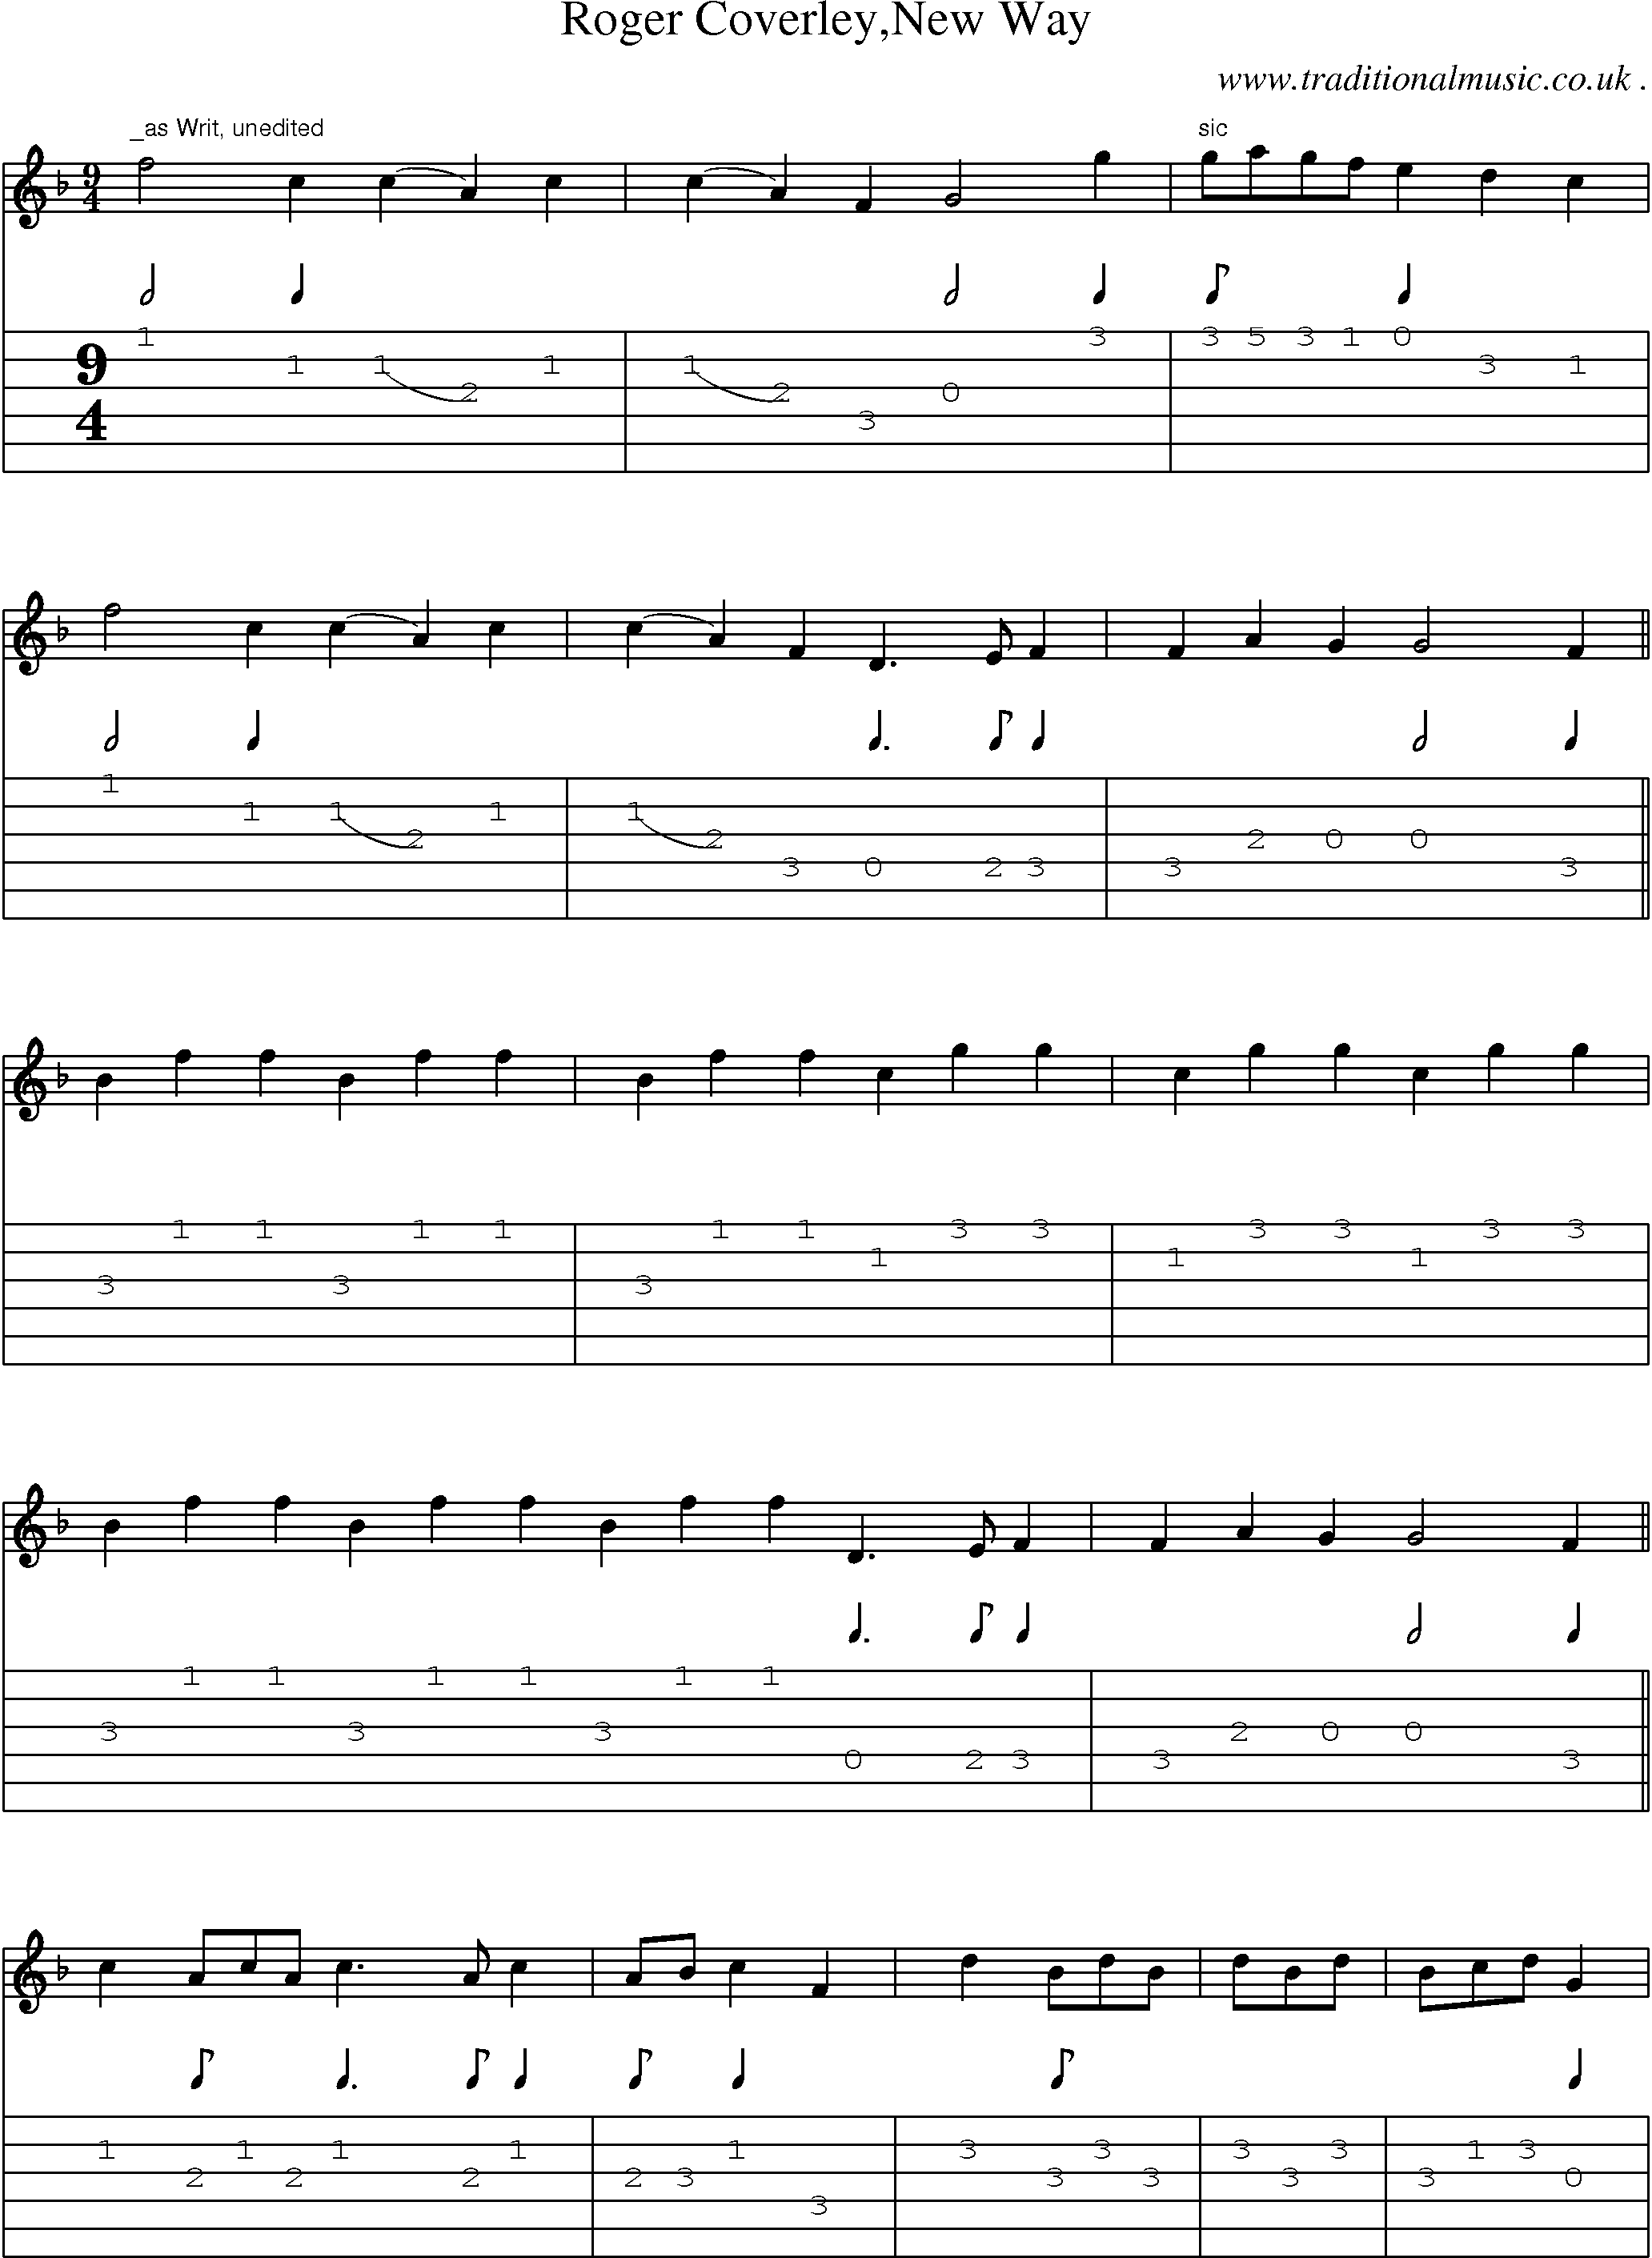 Sheet-Music and Guitar Tabs for Roger Coverleynew Way